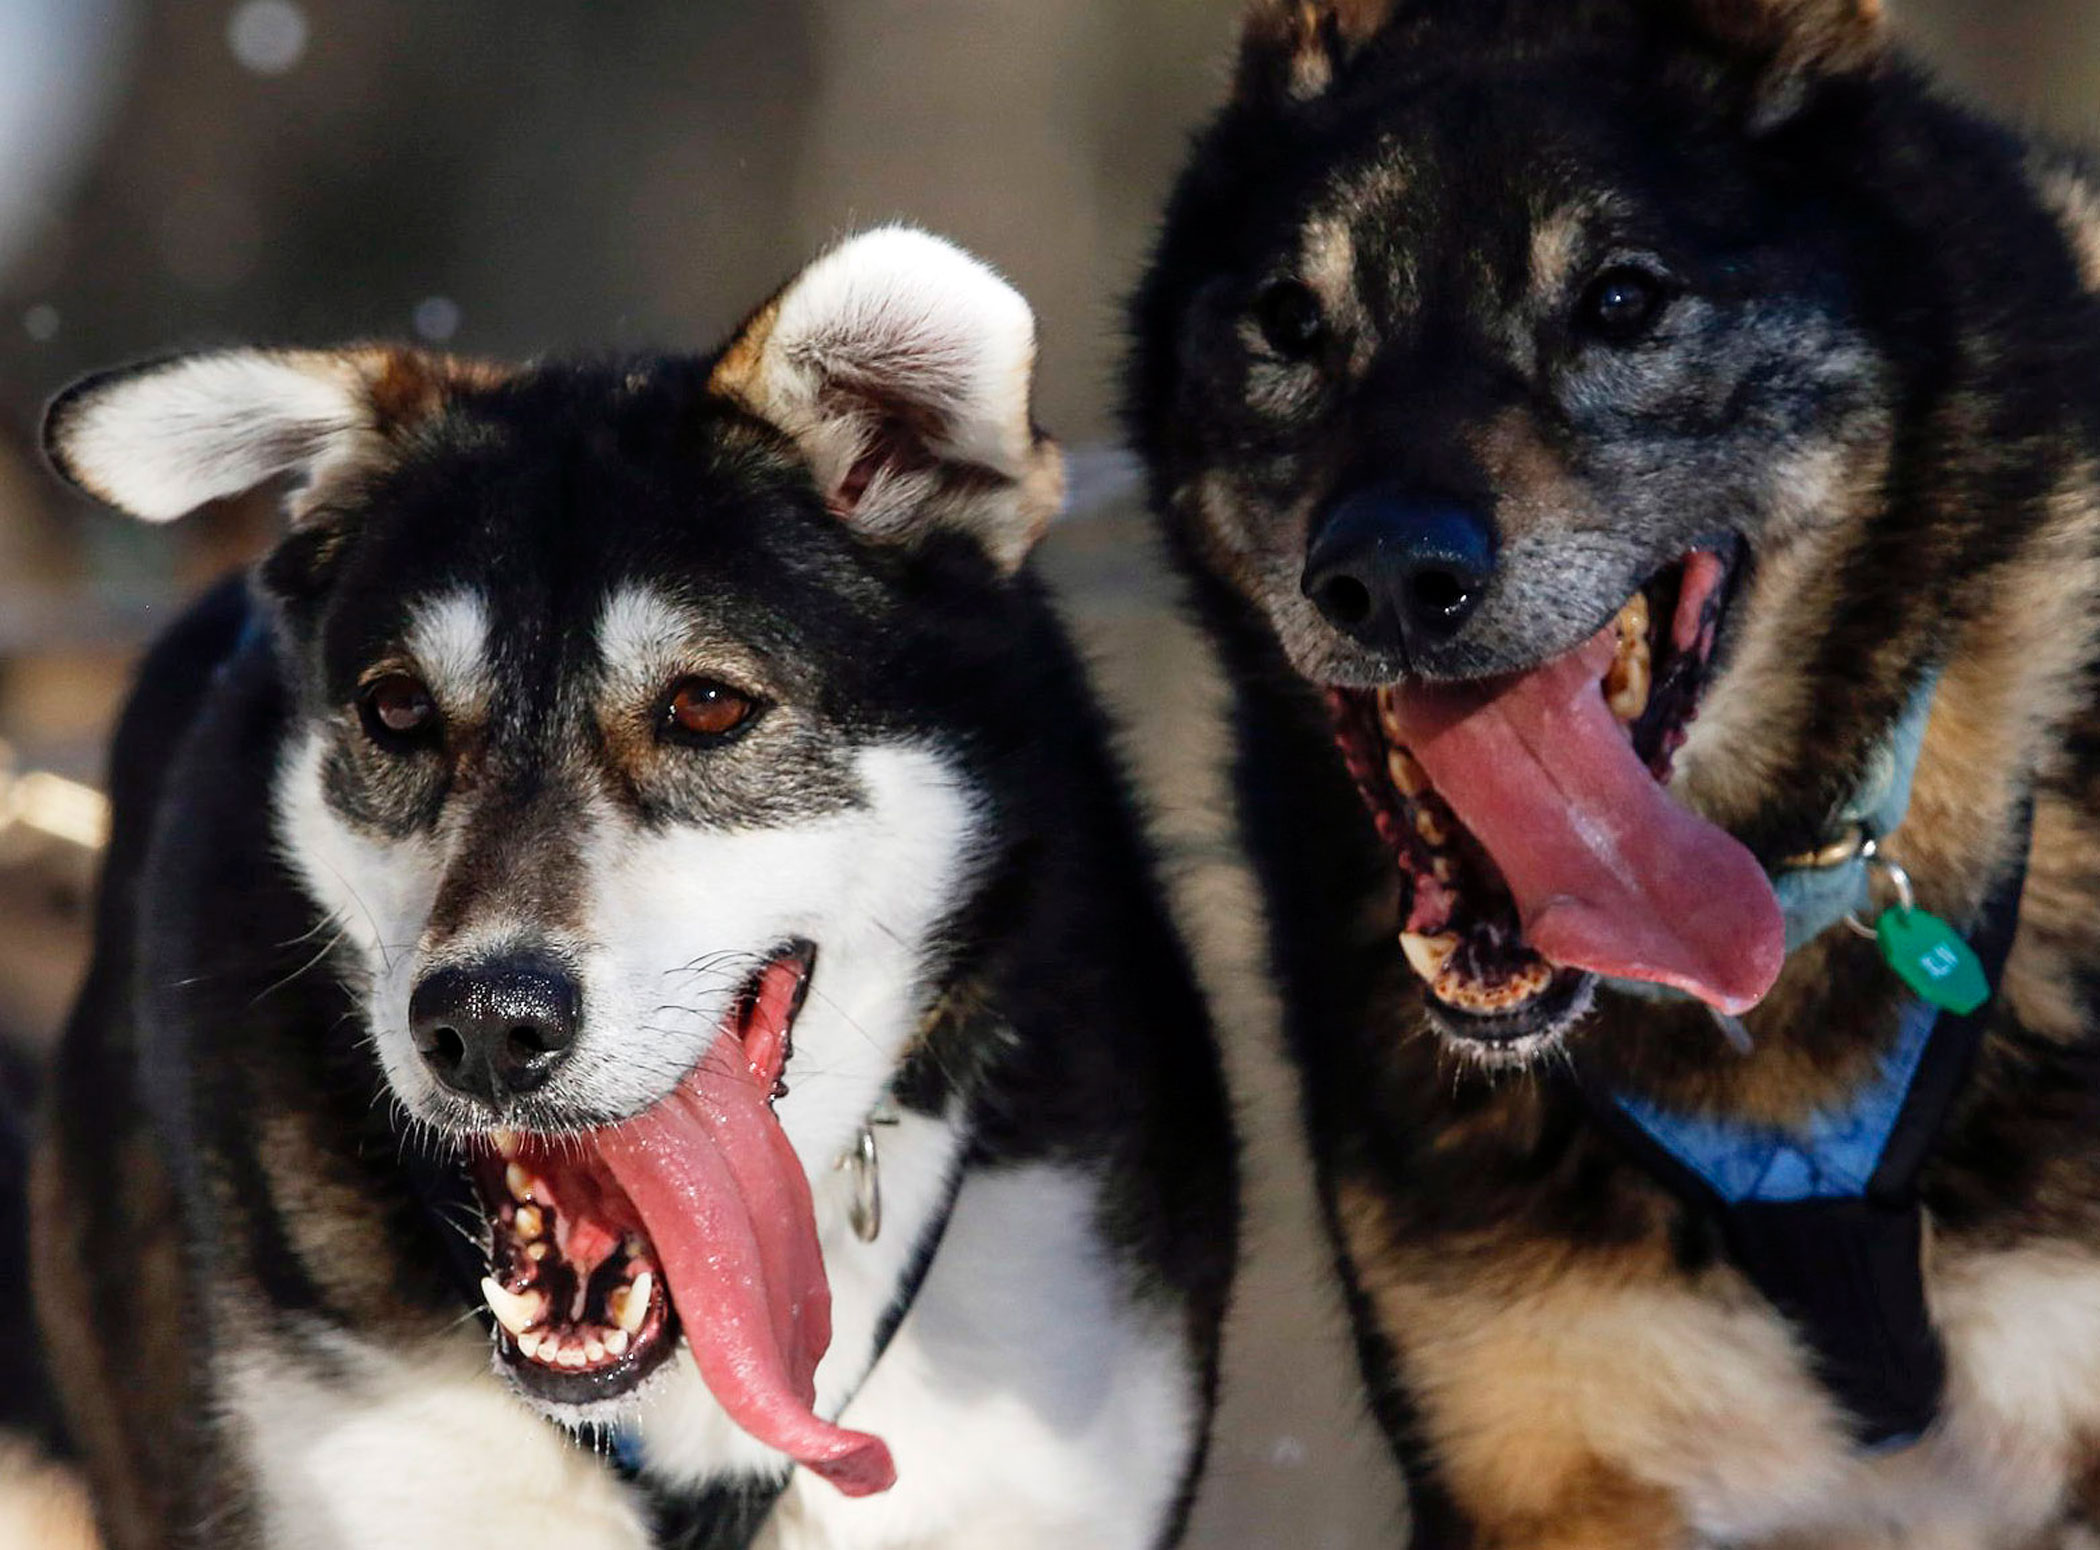 Sled dogs from Matthew Failor's team leave the restart of the Iditarod Trail Sled Dog Race in Willow, Alaska on March 6, 2016. Mushers and sled dog teams from around the world embark on Alaska's long-distance Iditarod Trail Sled Dog Race, starting a nearly 1,000-mile journey through the state's wilderness.